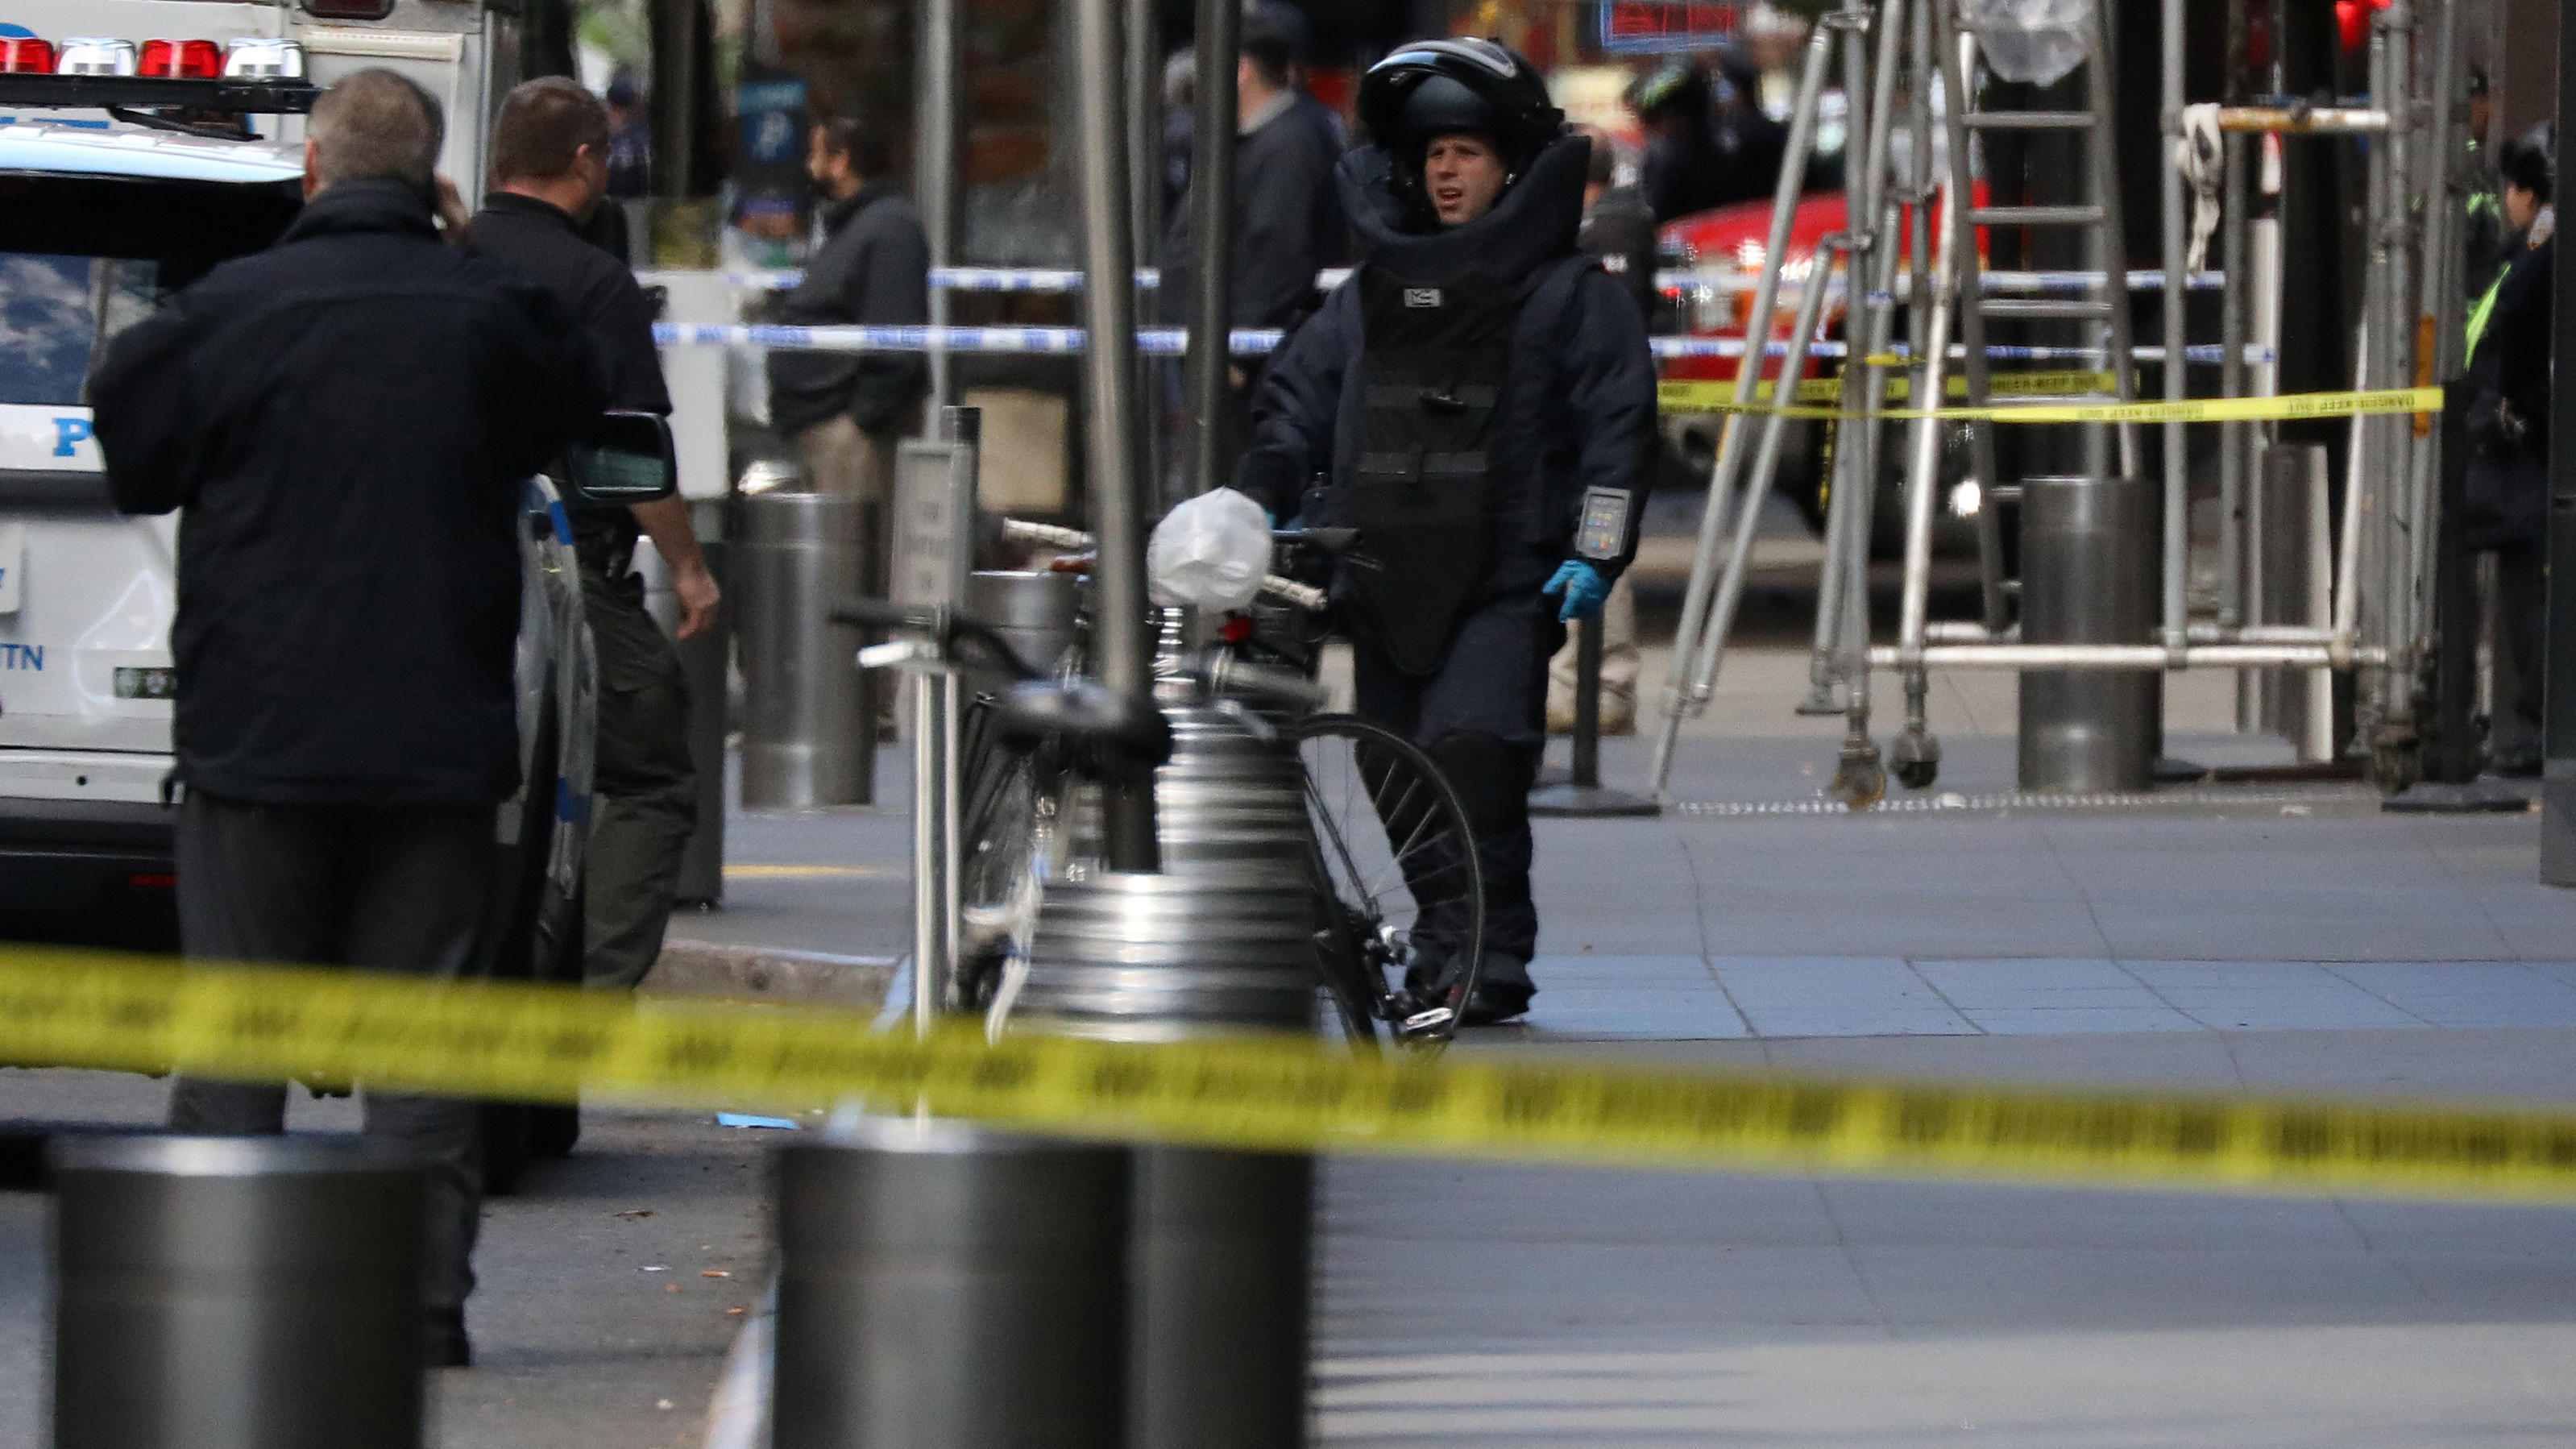 A member of the New York Police Department bomb squad is pictured outside the Time Warner Center in the Manahattan borough of New York City after a suspicious package was found inside the CNN Headquarters in New York, U.S., October 24, 2018. REUTERS/